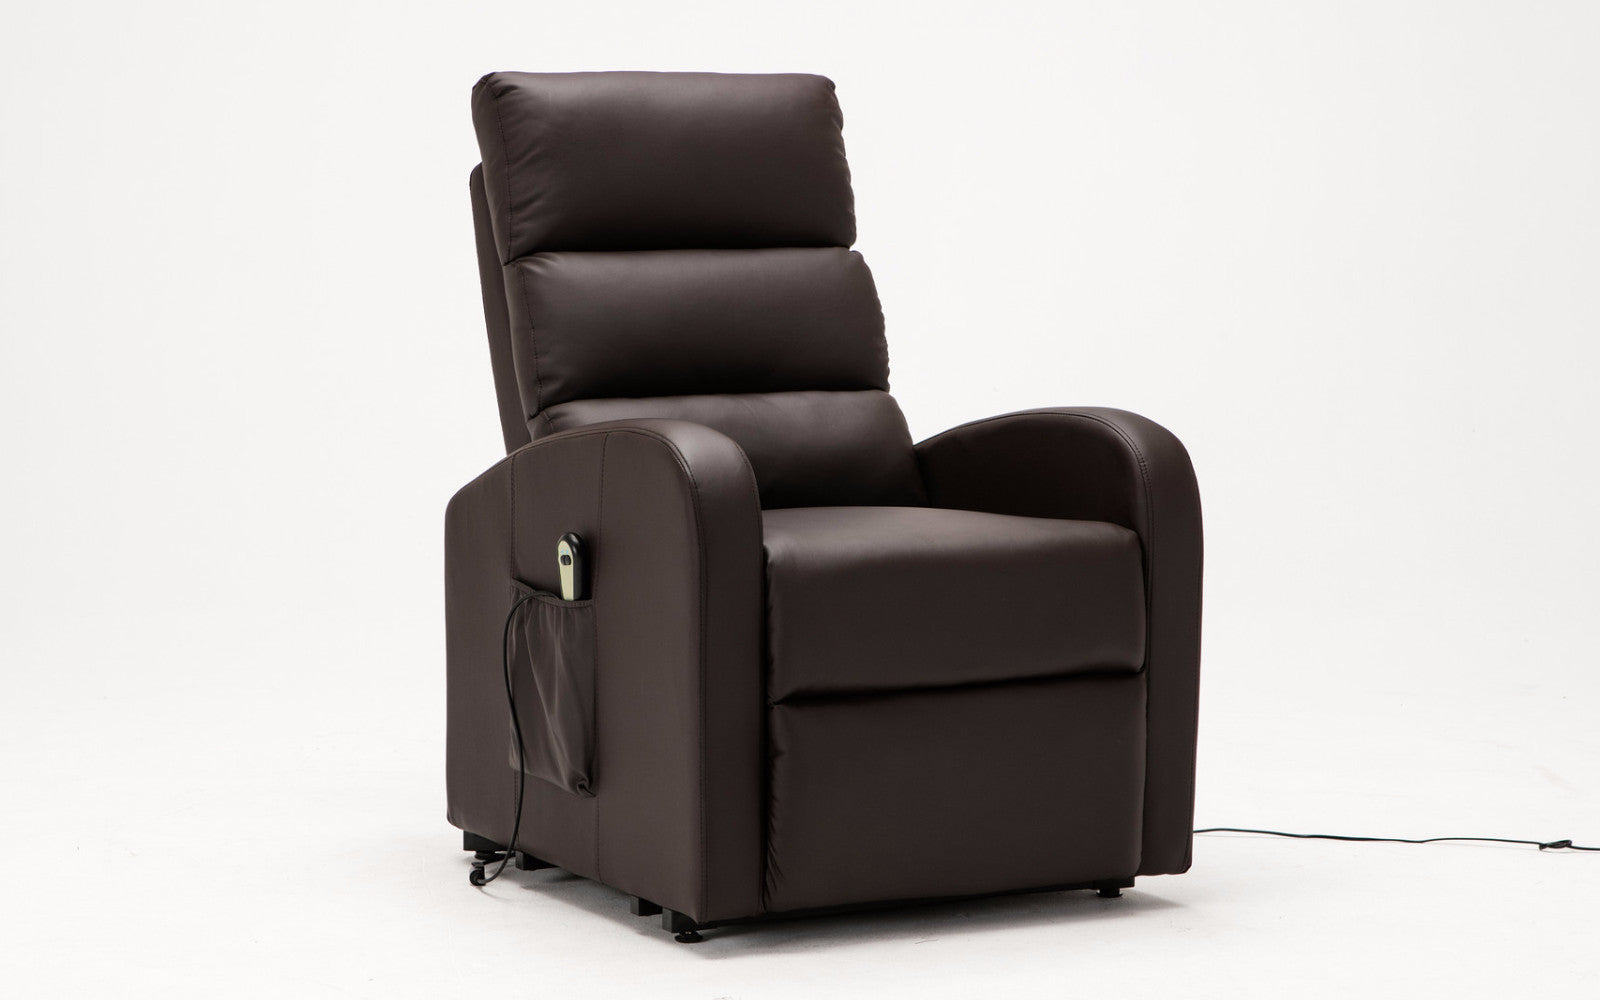 Lift Classic Power Lift Bonded Leather Recliner